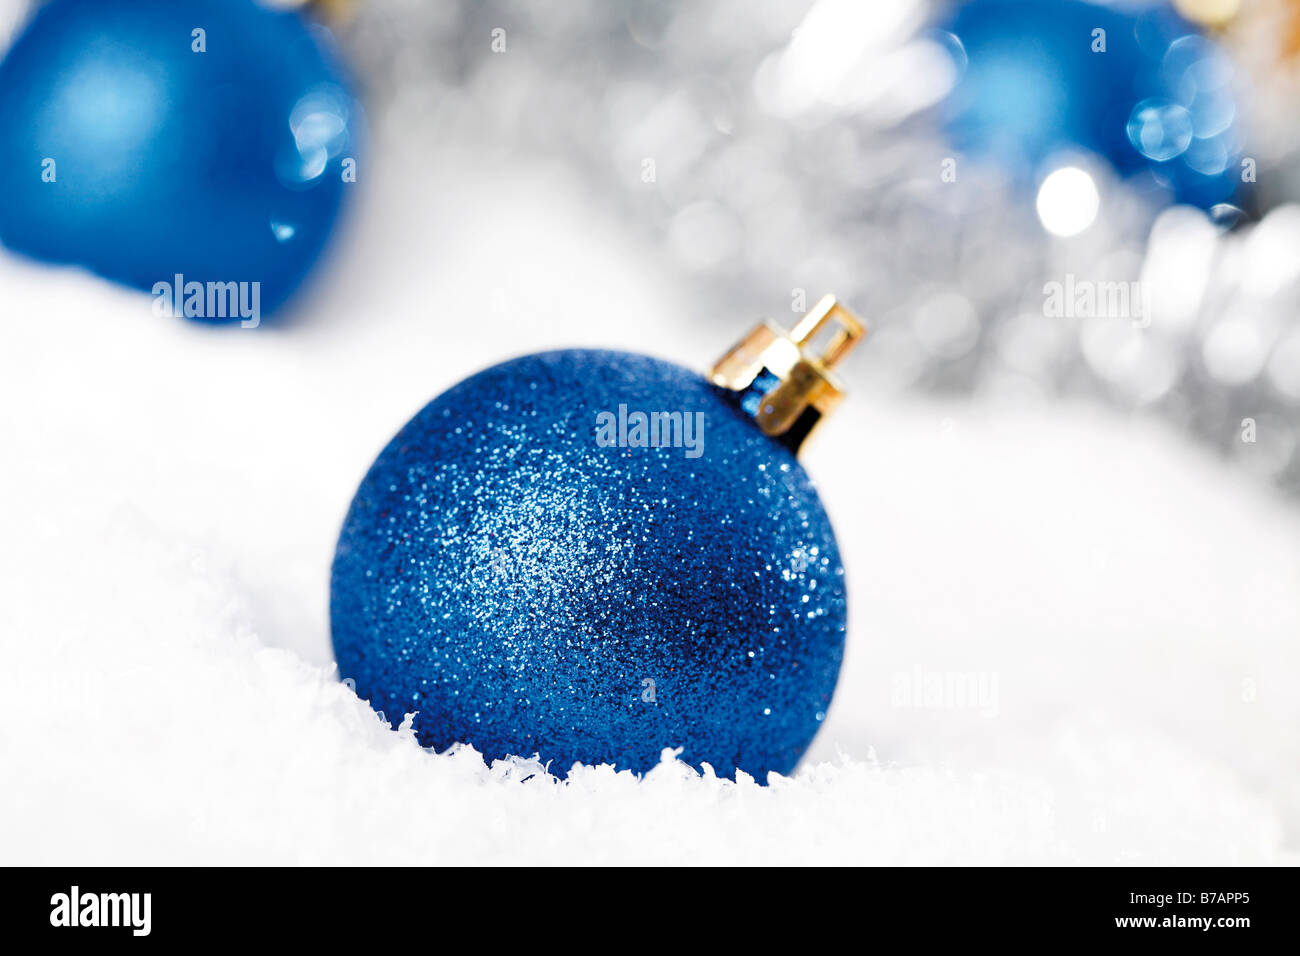 Blue glitter Christmas tree balls on snow with Christmas decorations Stock Photo